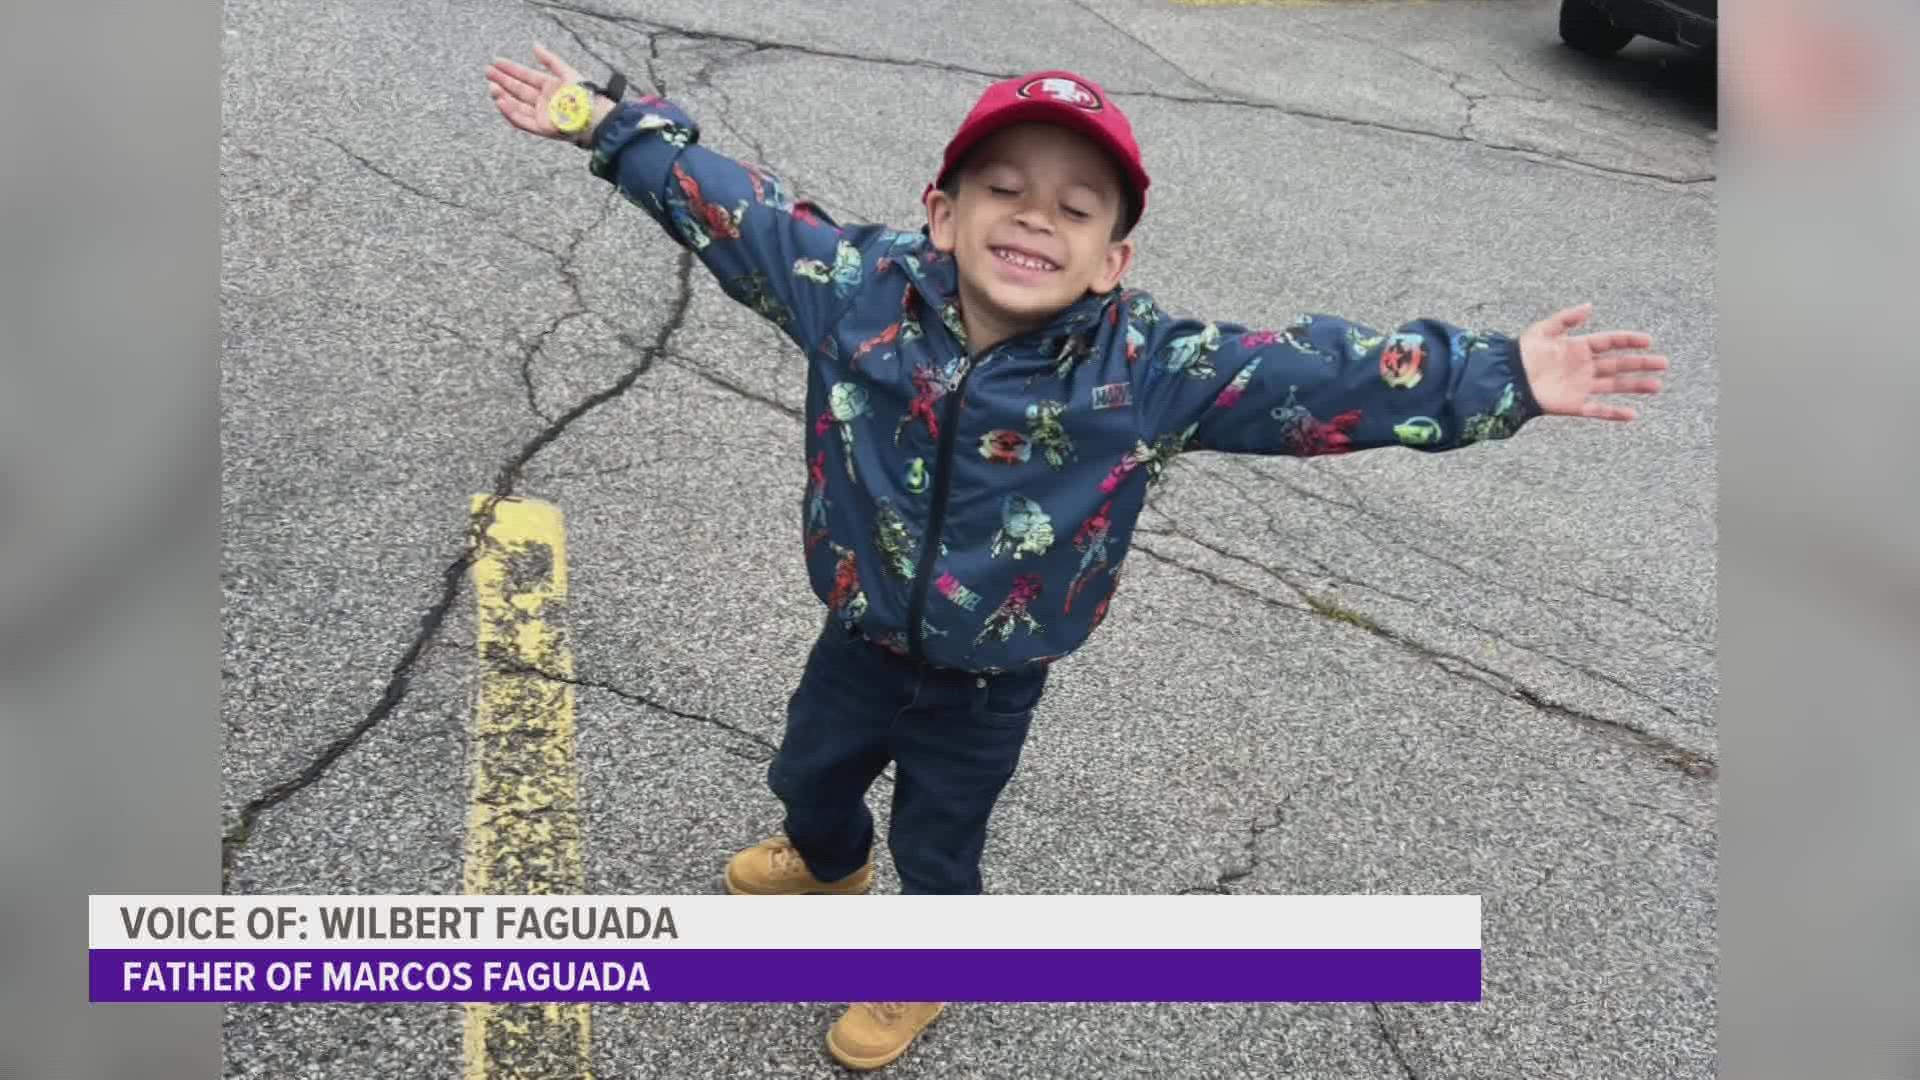 Just days after a 4-year-old boy died as a result of a crash on Fleur Drive, Local 5 spoke to his father about navigating the grief that follows.